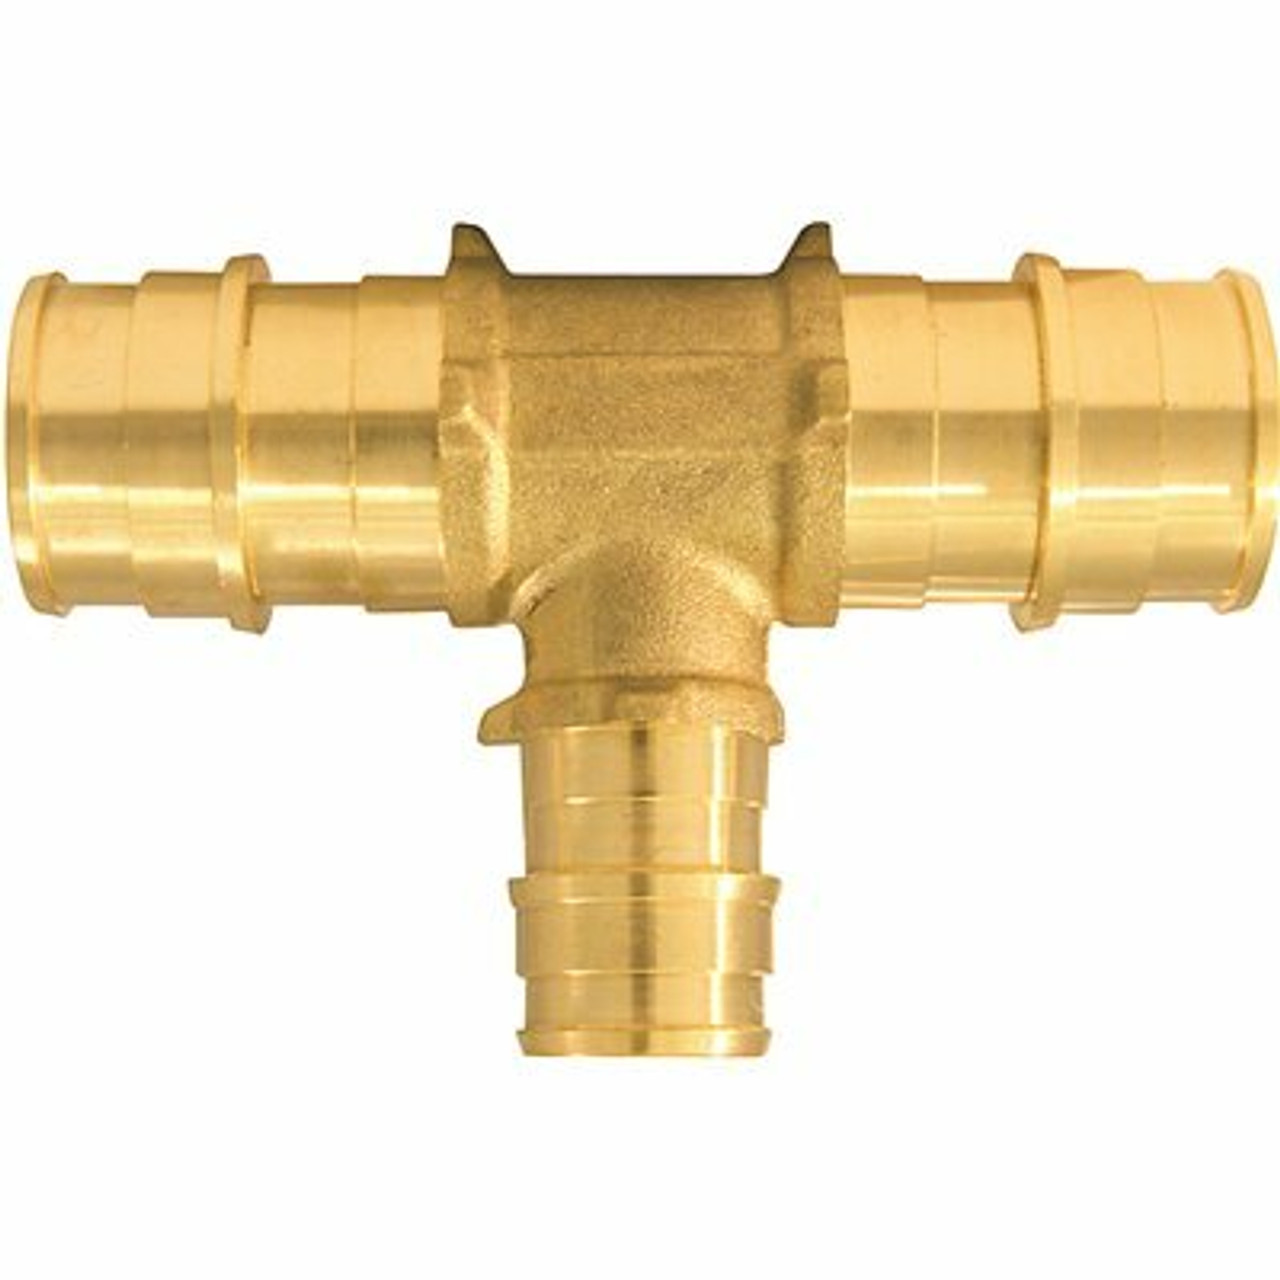 Apollo 3/4 In. X 3/4 In. X 1/2 In. Brass Pex-A Barb Reducing Tee Fitting